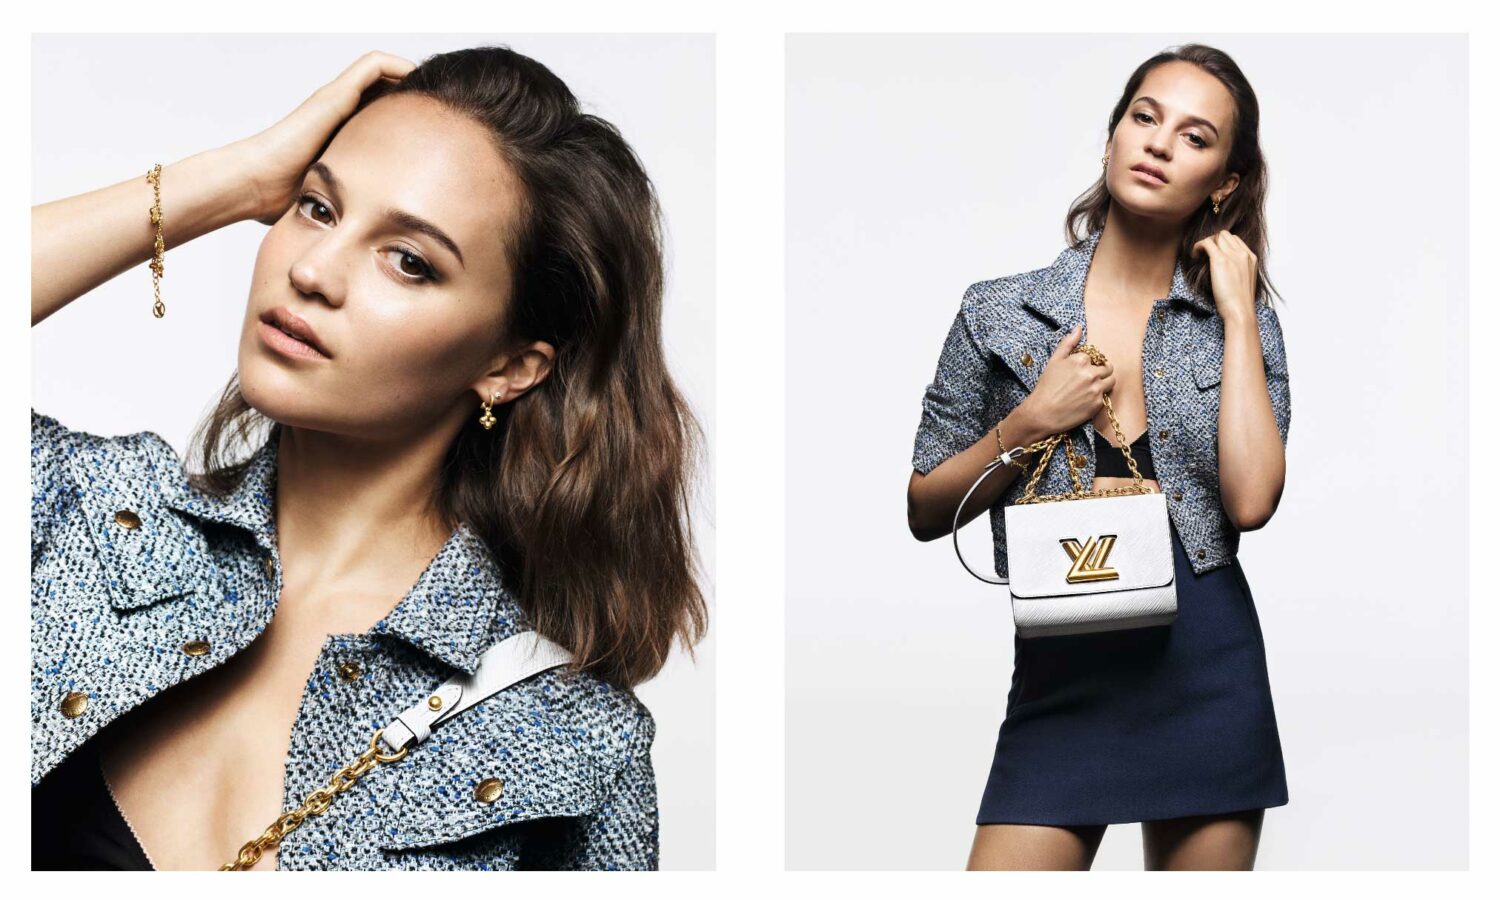 Alicia Vikander & Léa Seydoux Front a New Campaign for Louis